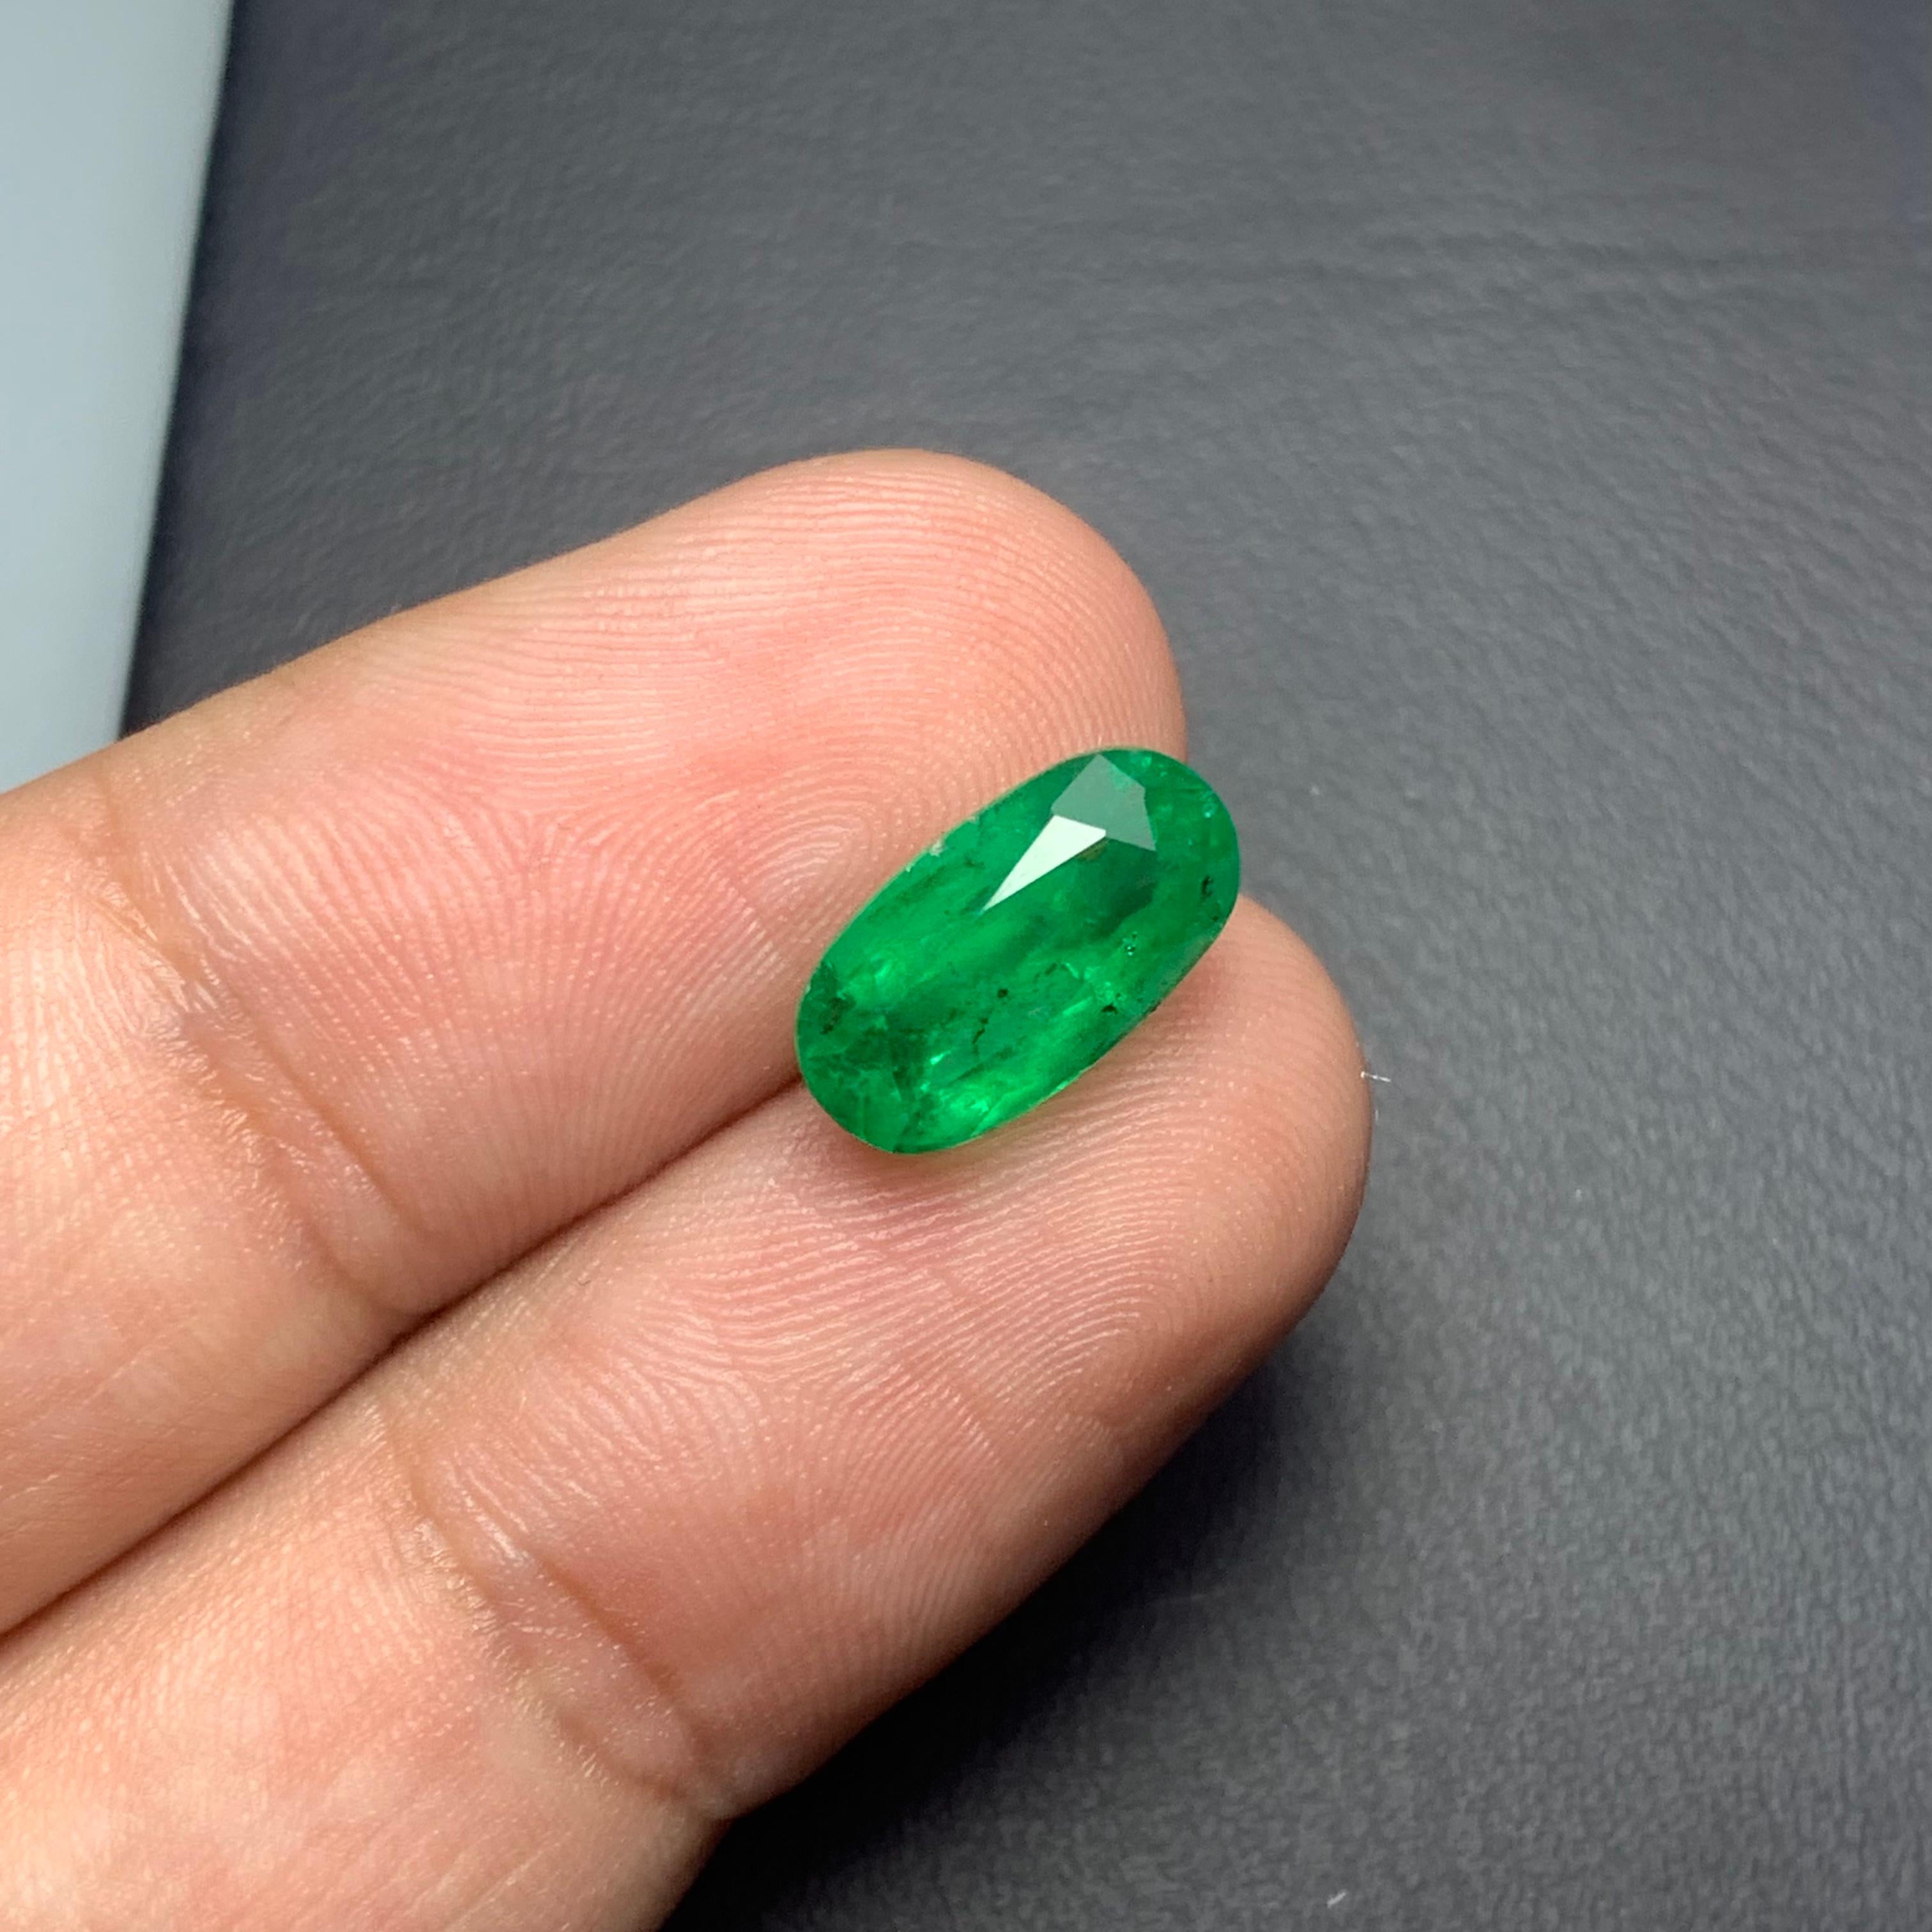 Gorgeous Natural Vivid Green Emerald Oval Shape from Pakistan Mine 3.10 Carat 1